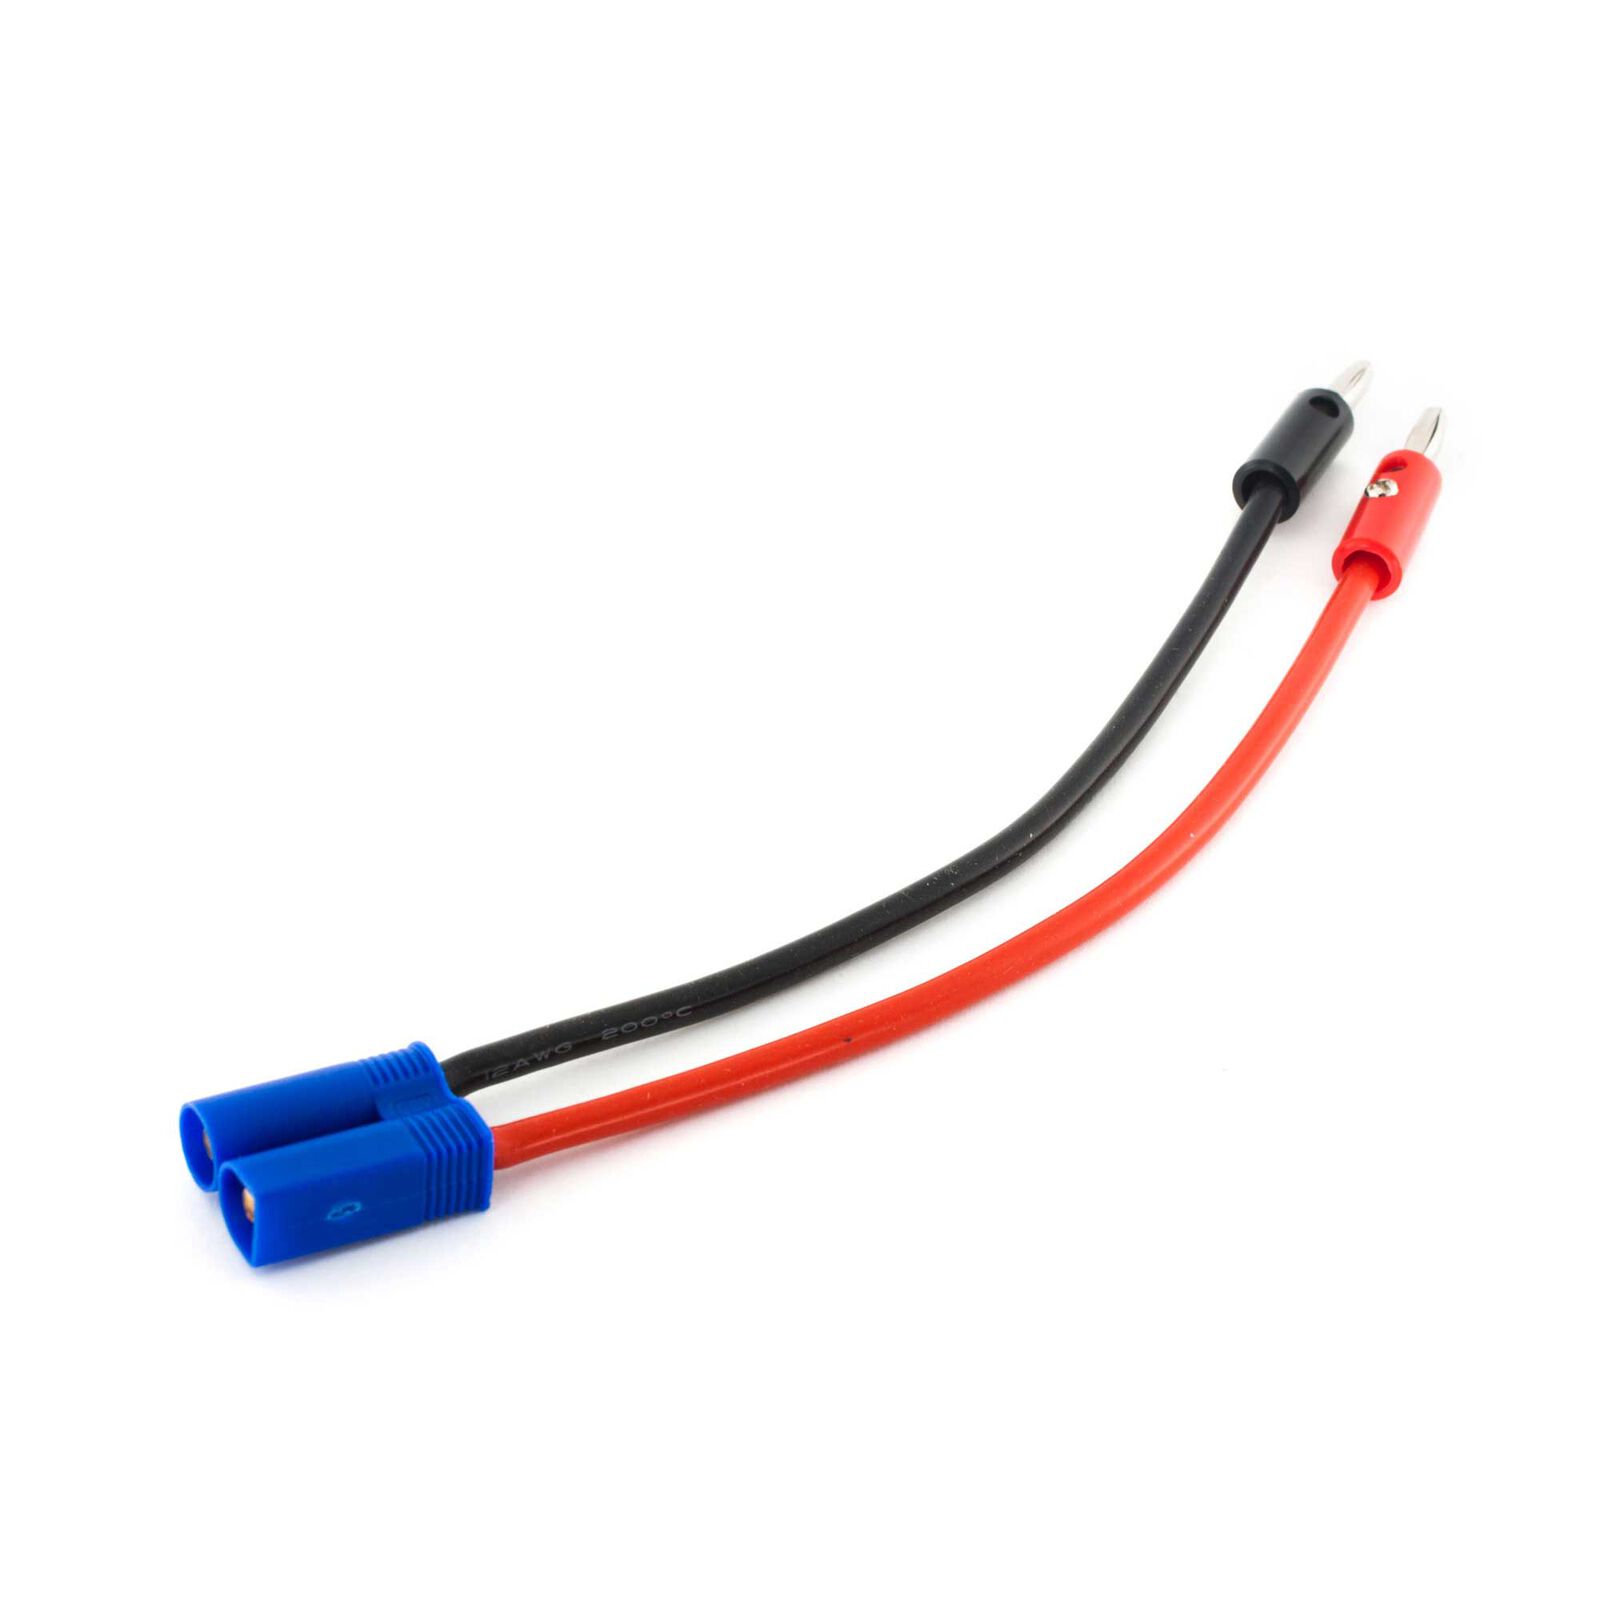 Charge Lead: EC5 Device with 6" Wire & Jacks, 12 AWG